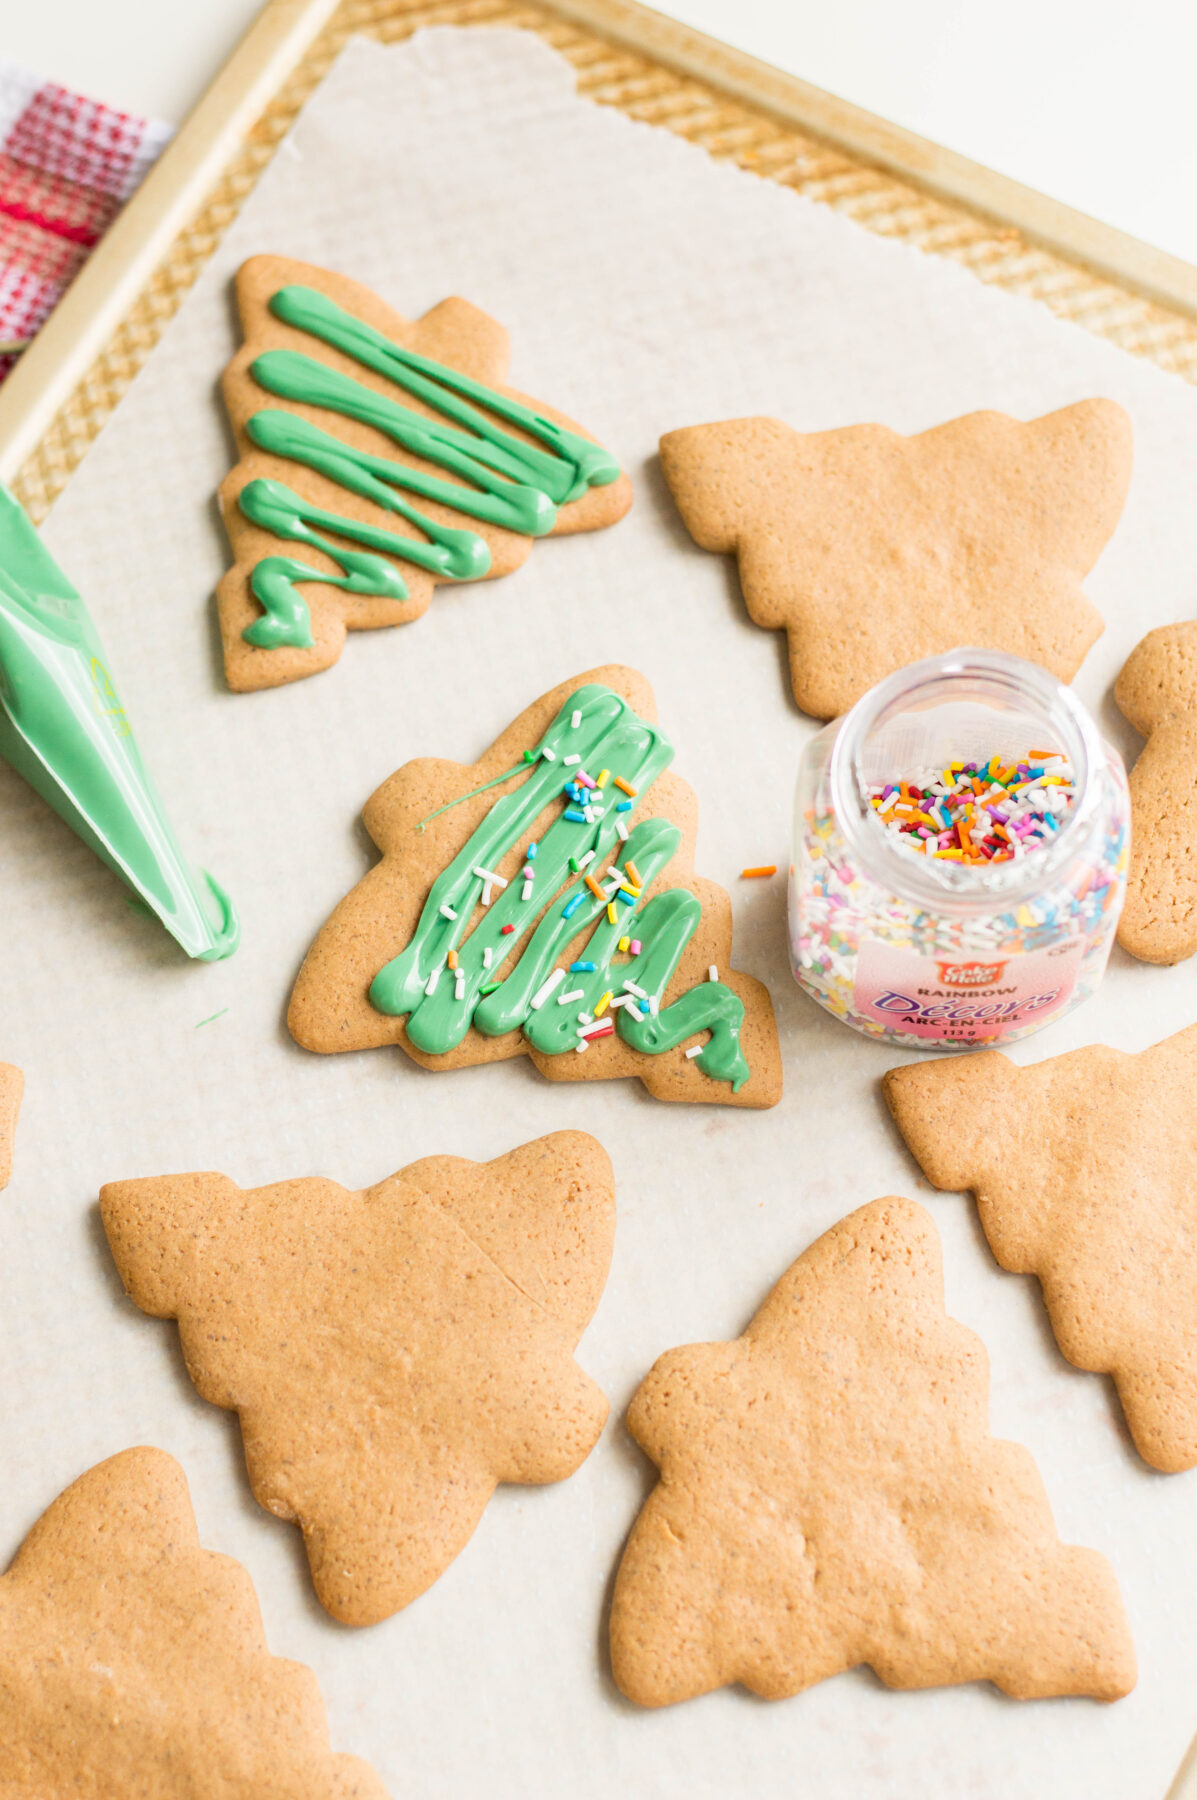 Decorating the gingerbread cookies with green candy melts and rainbow sprinkles.